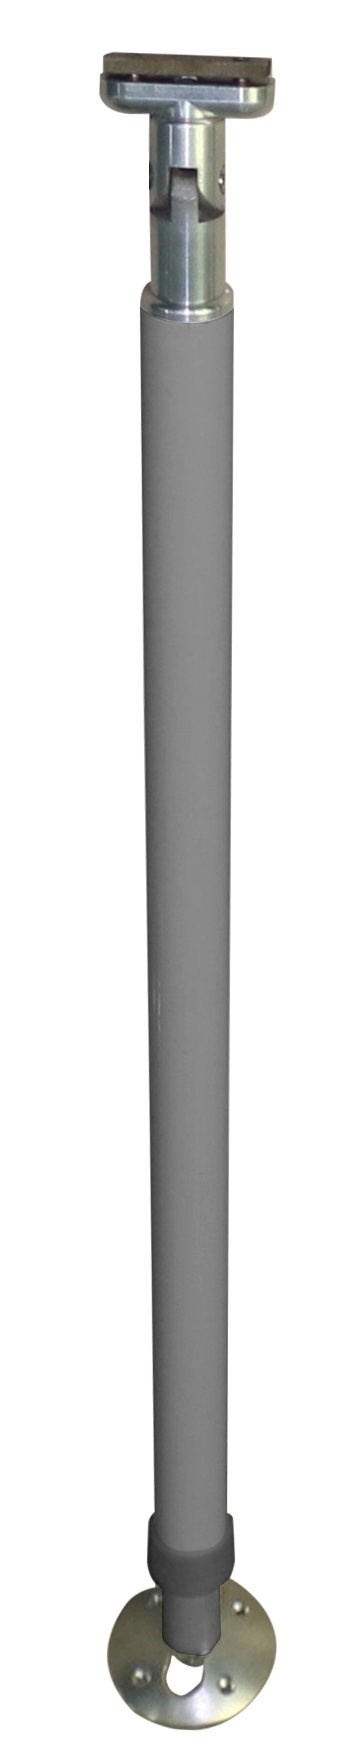 Support Pole Kit for Awnings - Adjustable 1.7m to 2.9m (Charcoal)